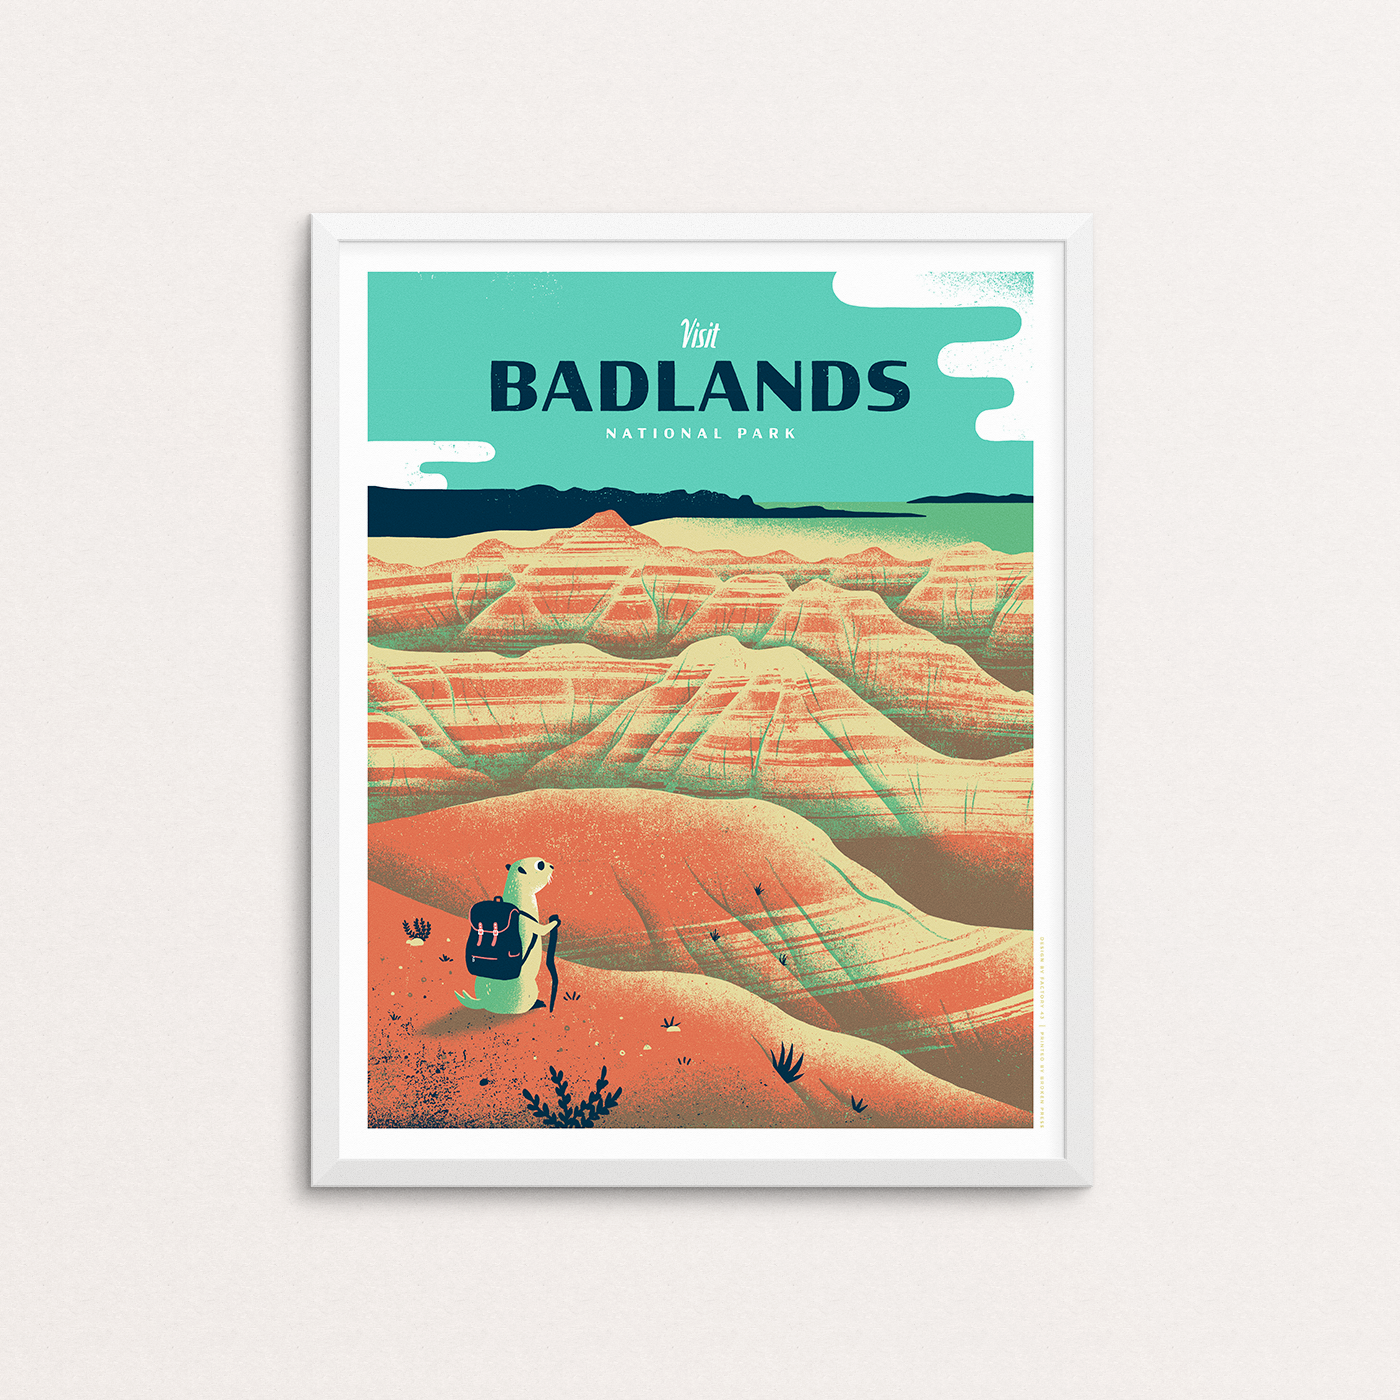 Badlands National Park screenprinted poster print. It features South Dakota, black foot ferret, Bear Butte and the Black Hills. The print is show in a white frame.